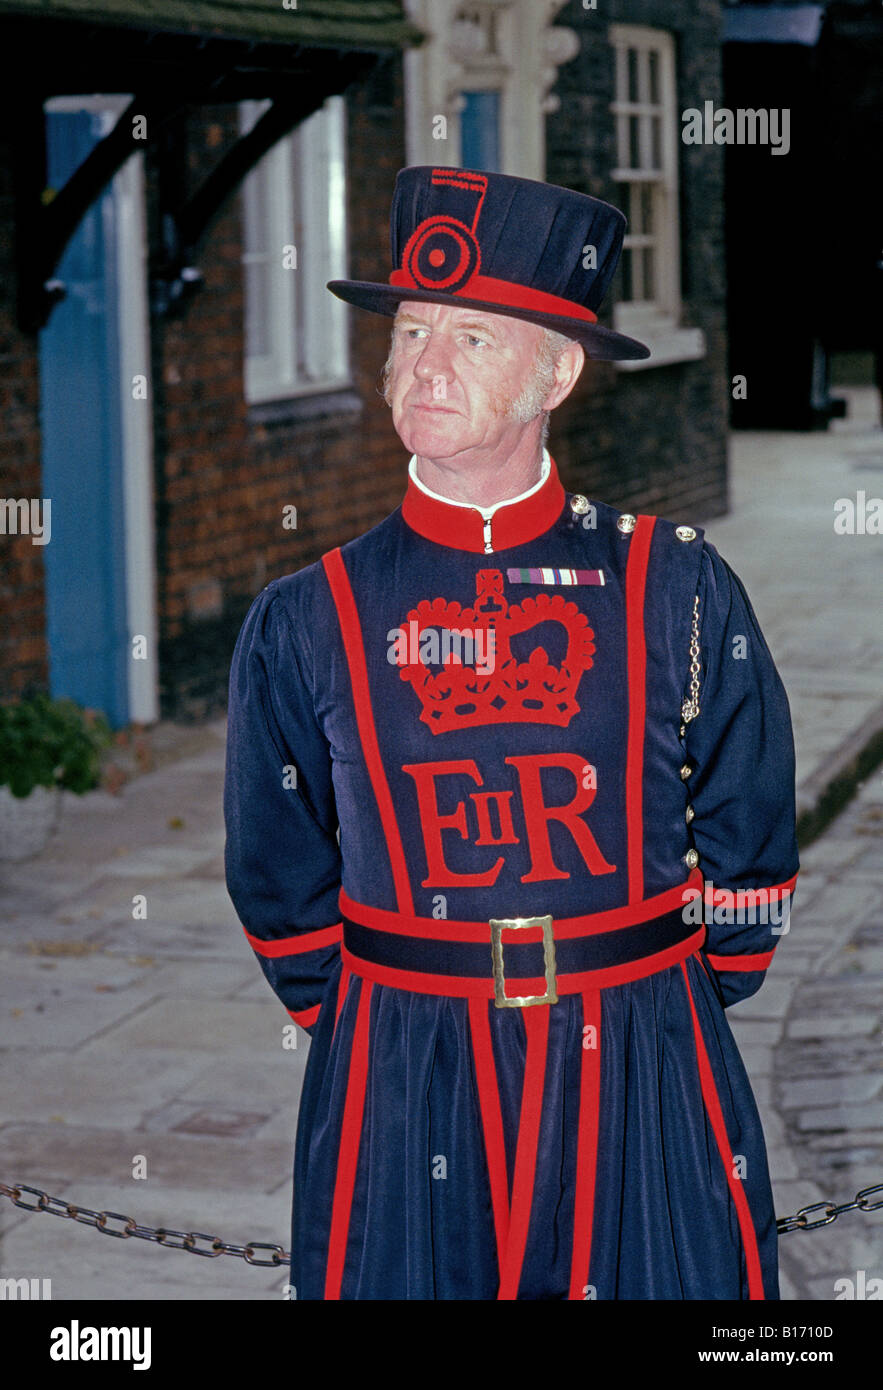 GREAT BRITAIN: EUROPE: ENGLAND: BRITISH ISLES: LONDON: Portrait of a Beefeater at the Tower Of London Stock Photo